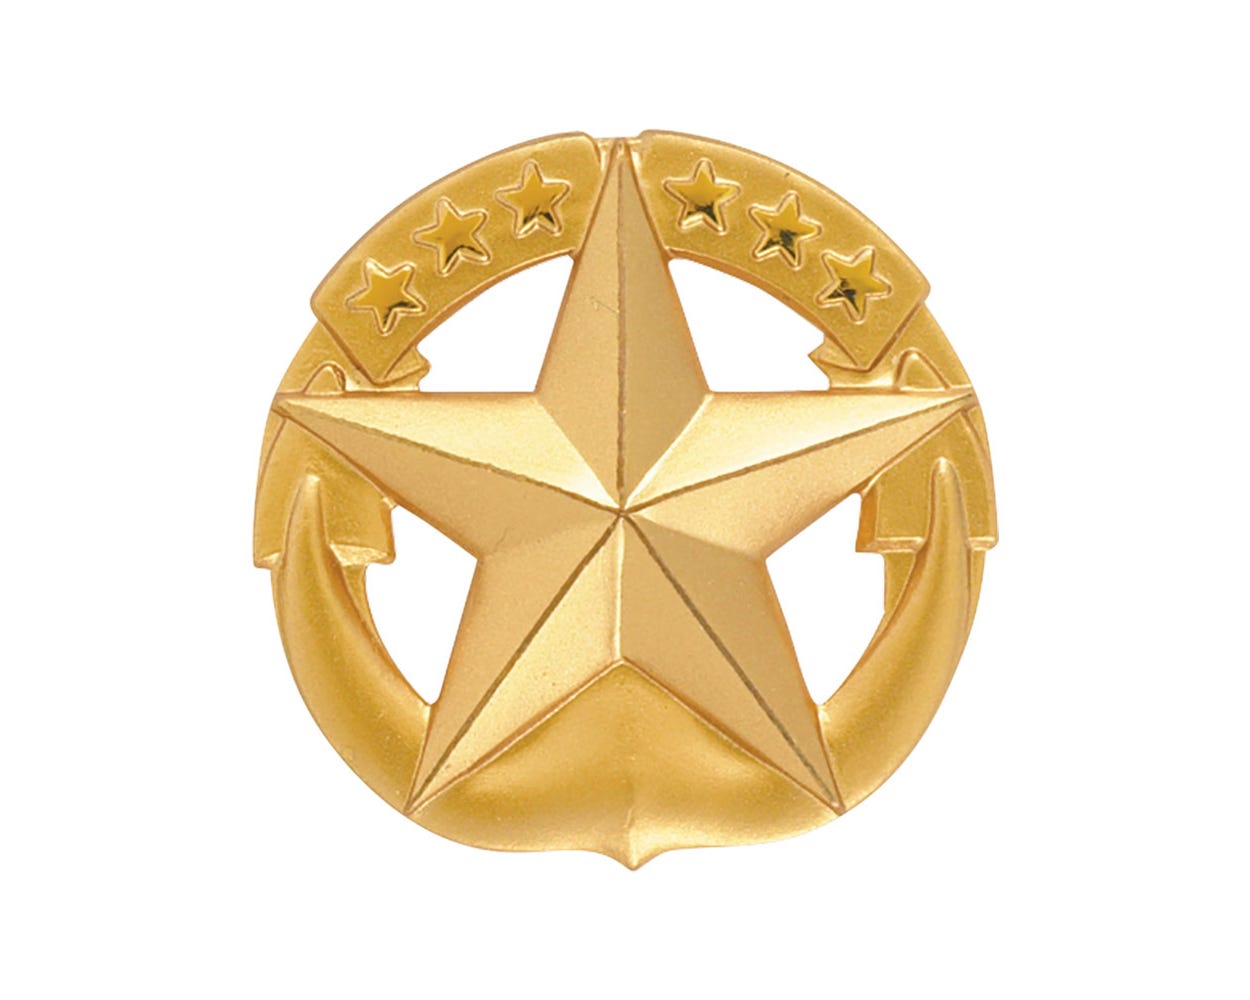 Navy Command Sea Badges Manufacturers in Australia